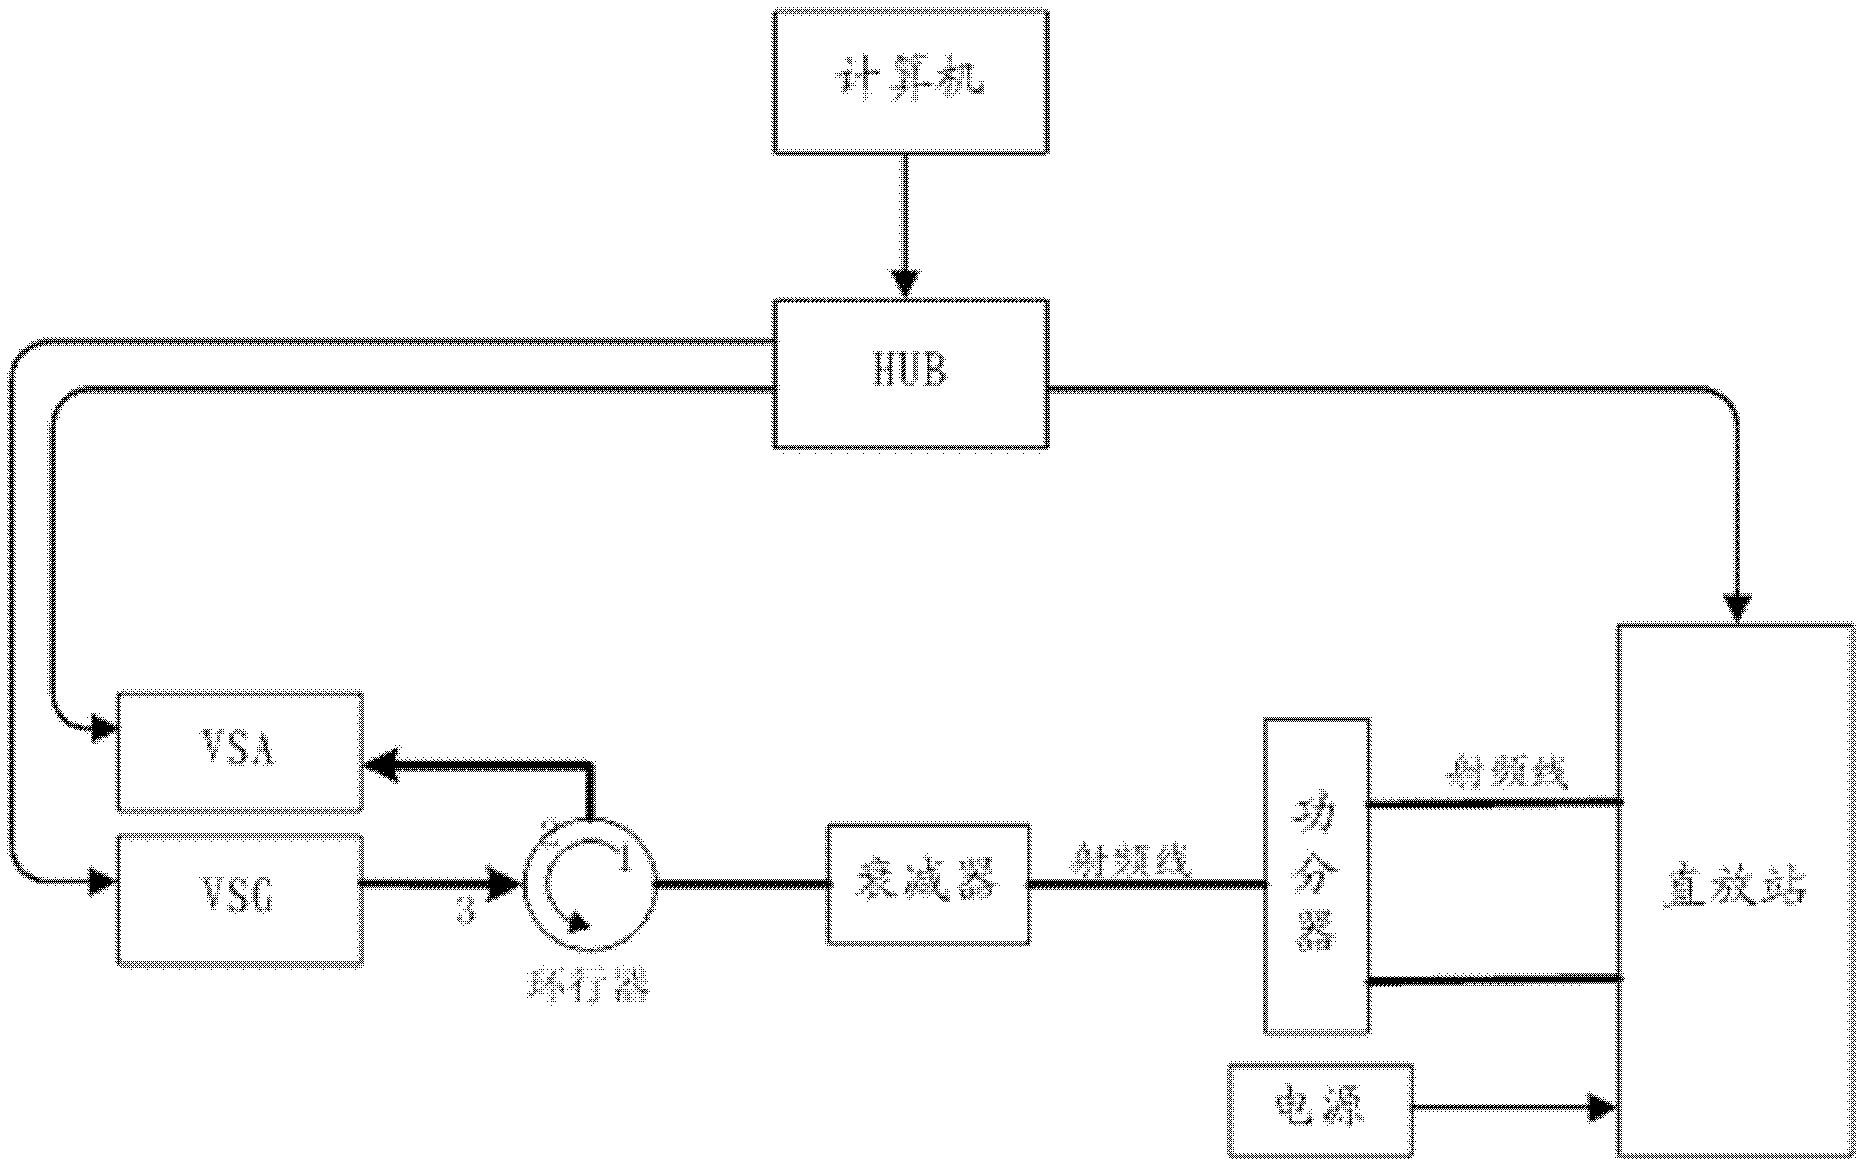 Two-stage based automatic calibration and correction method and system for repeater